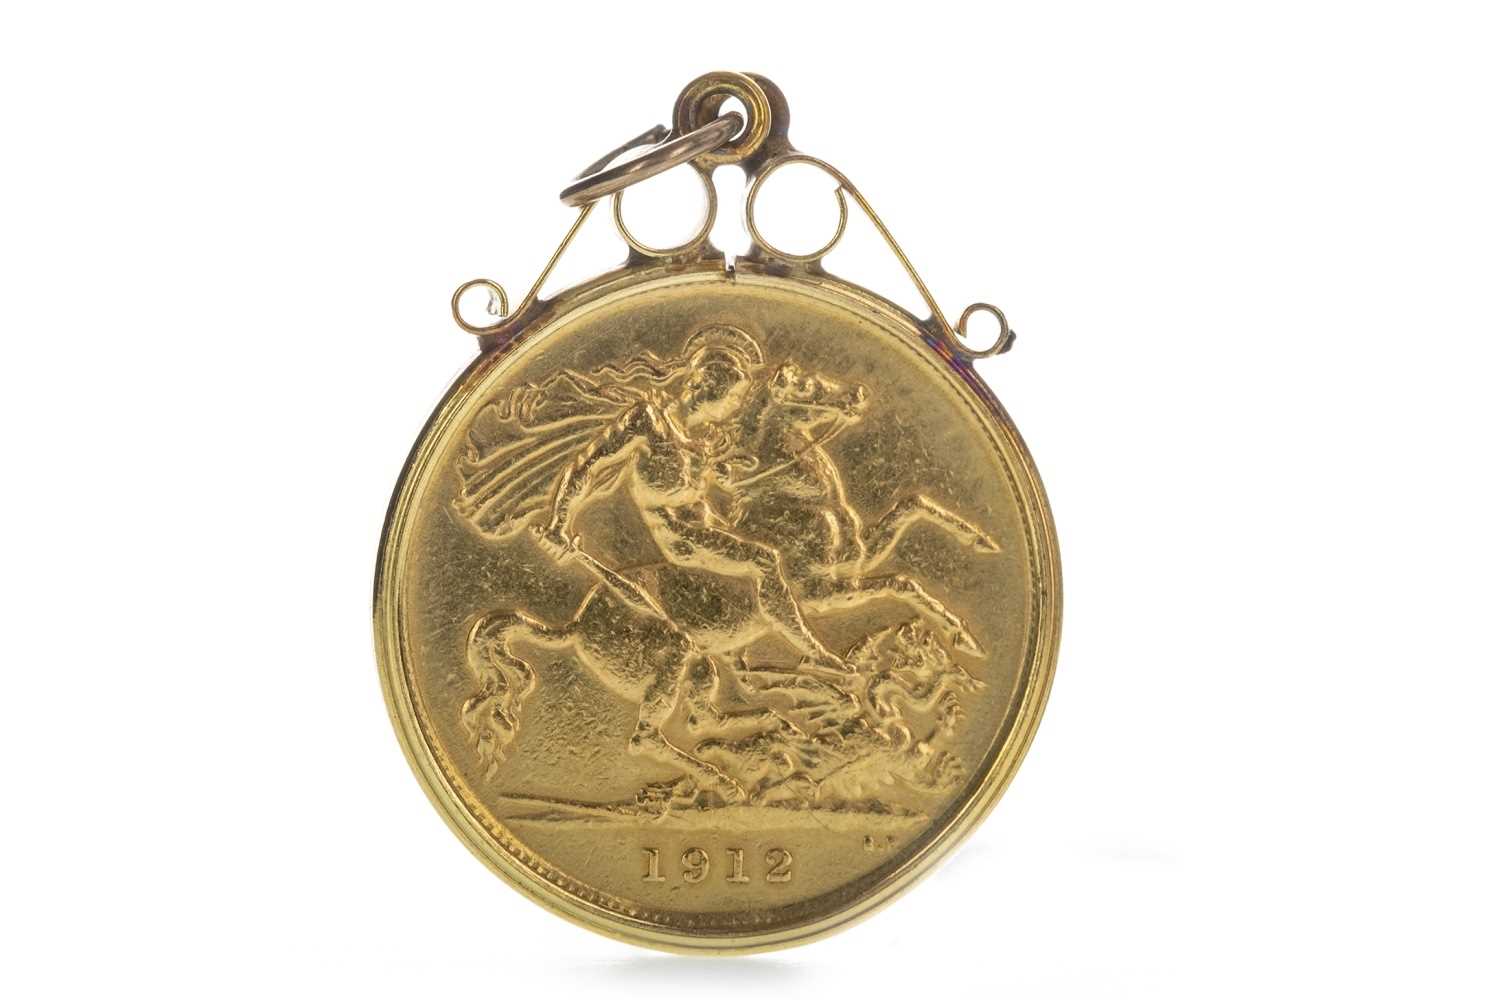 Lot 187 - A KING GEORGE V (1910 - 1936) GOLD HALF SOVEREIGN DATED 1912 IN PENDANT MOUNT